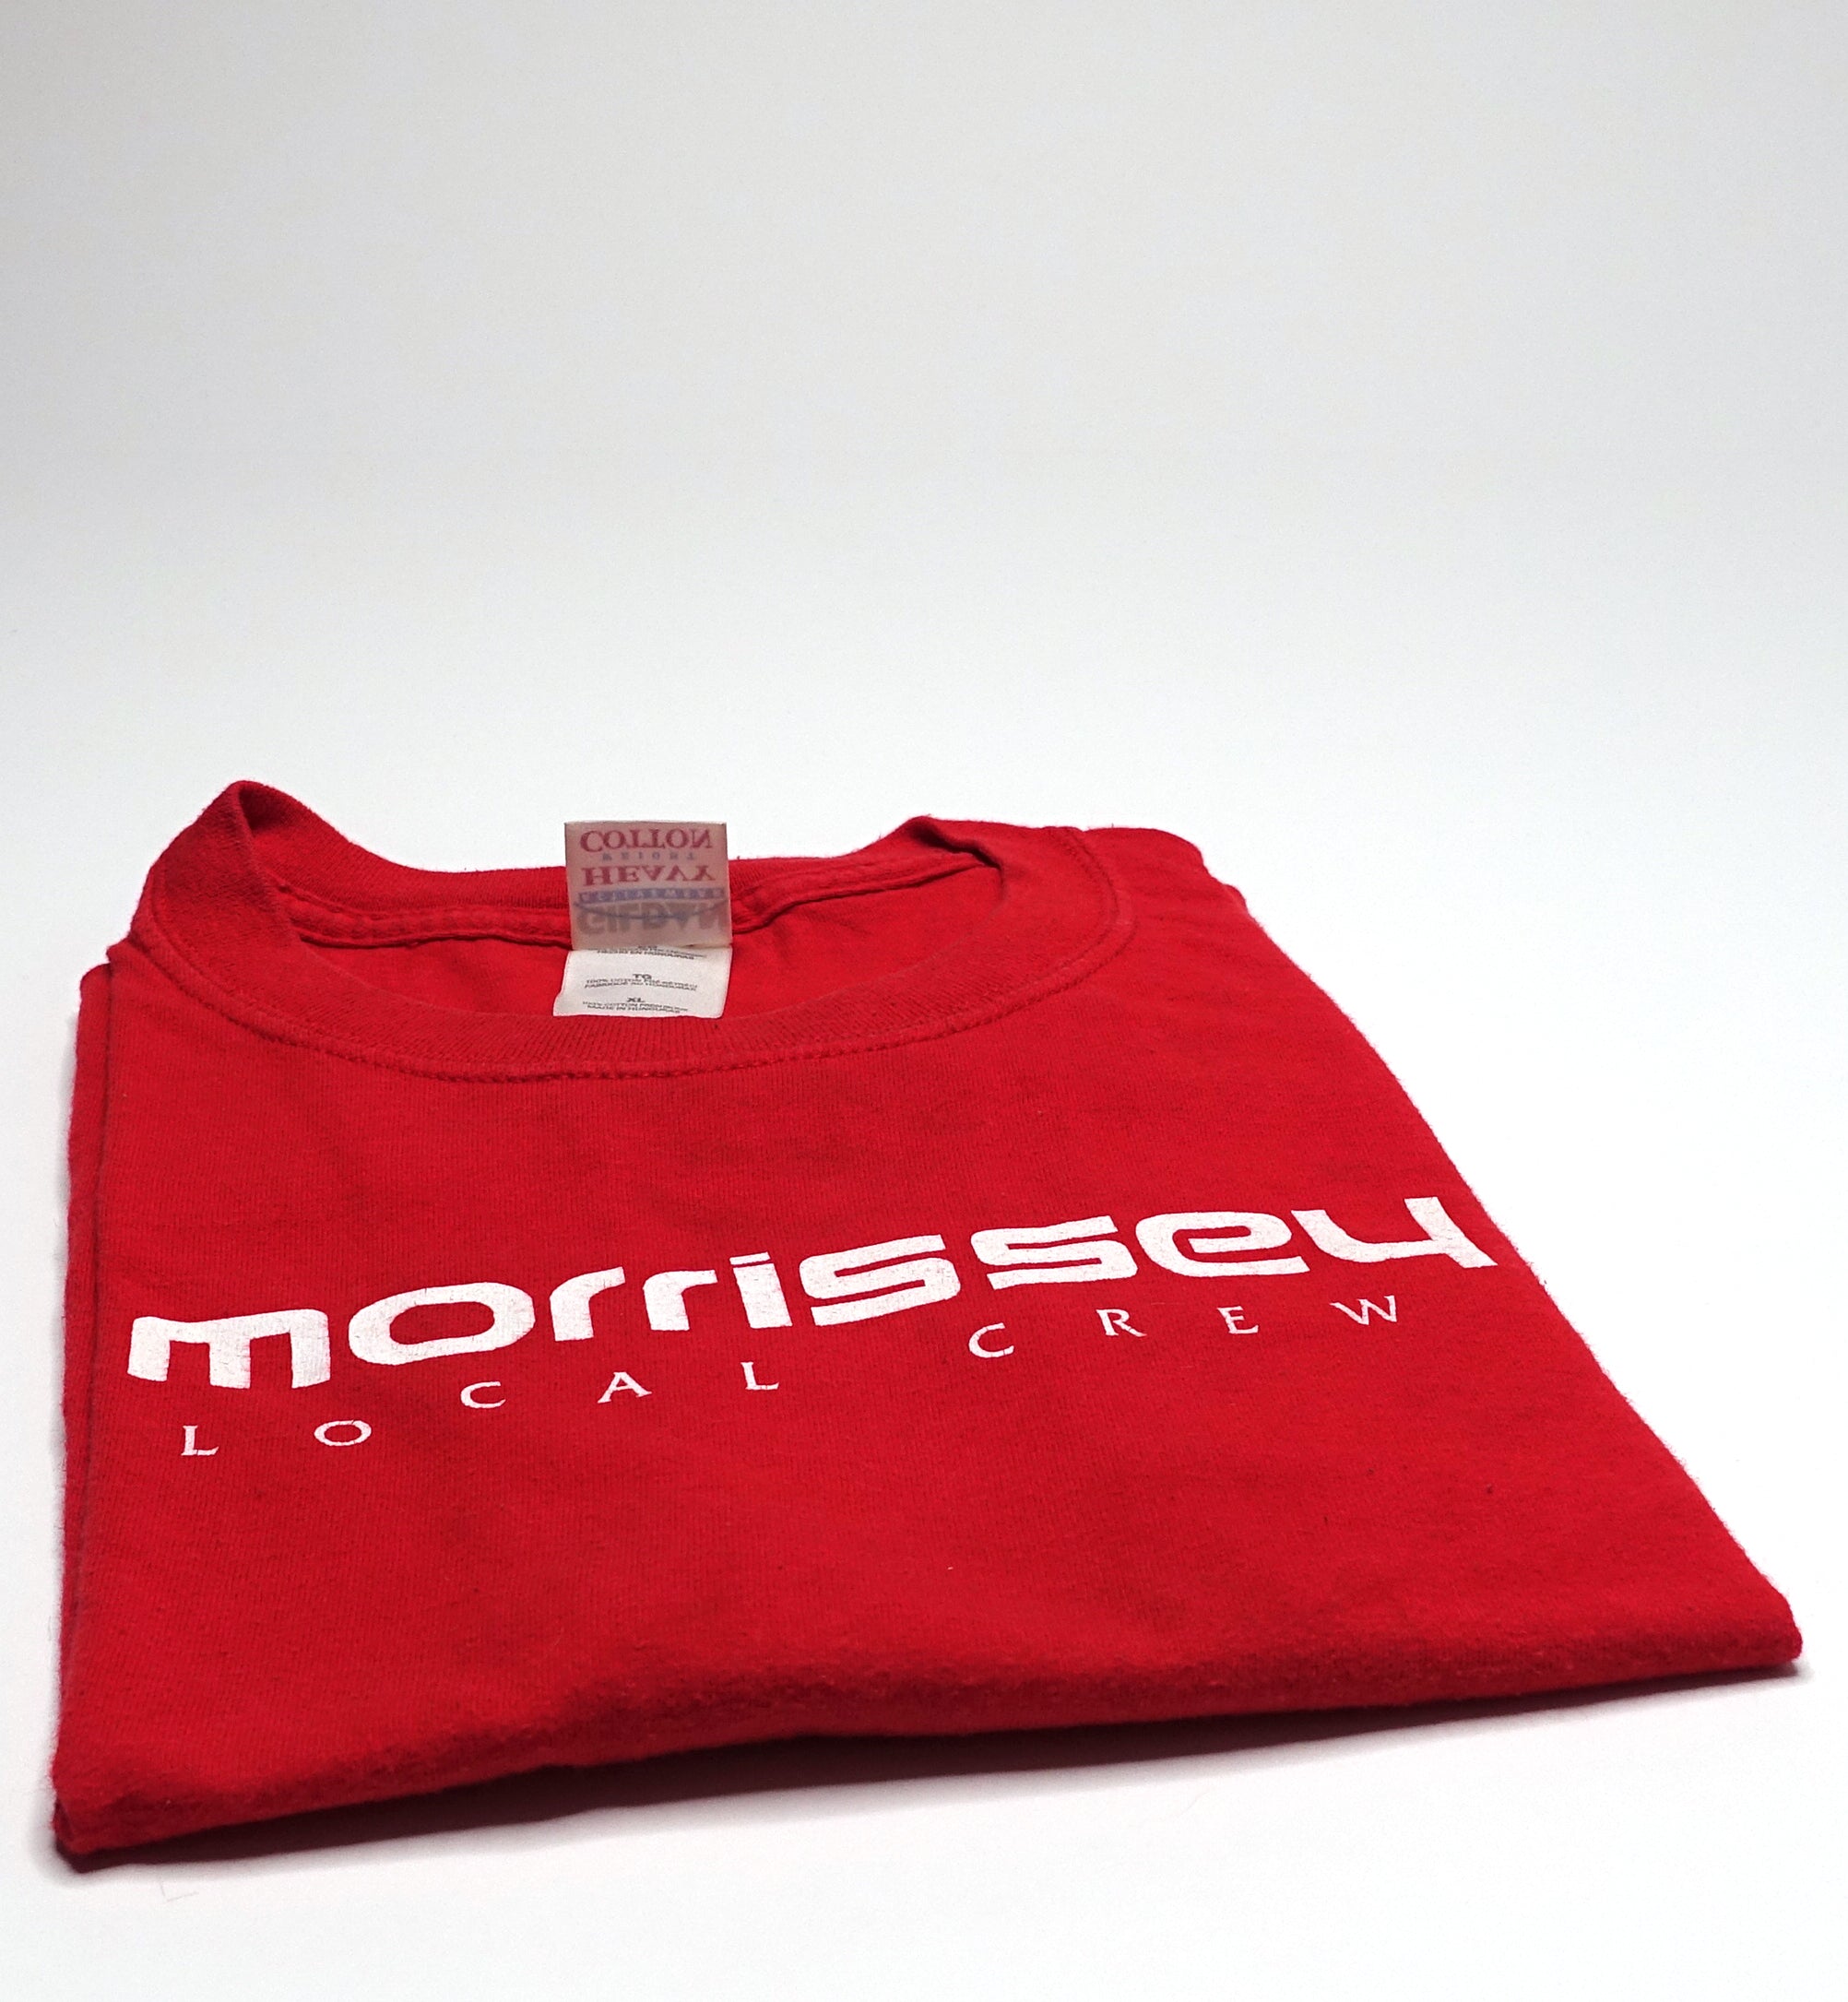 Morrissey - You Are The Quarry 2004 Crew Only Tour Shirt Size XL